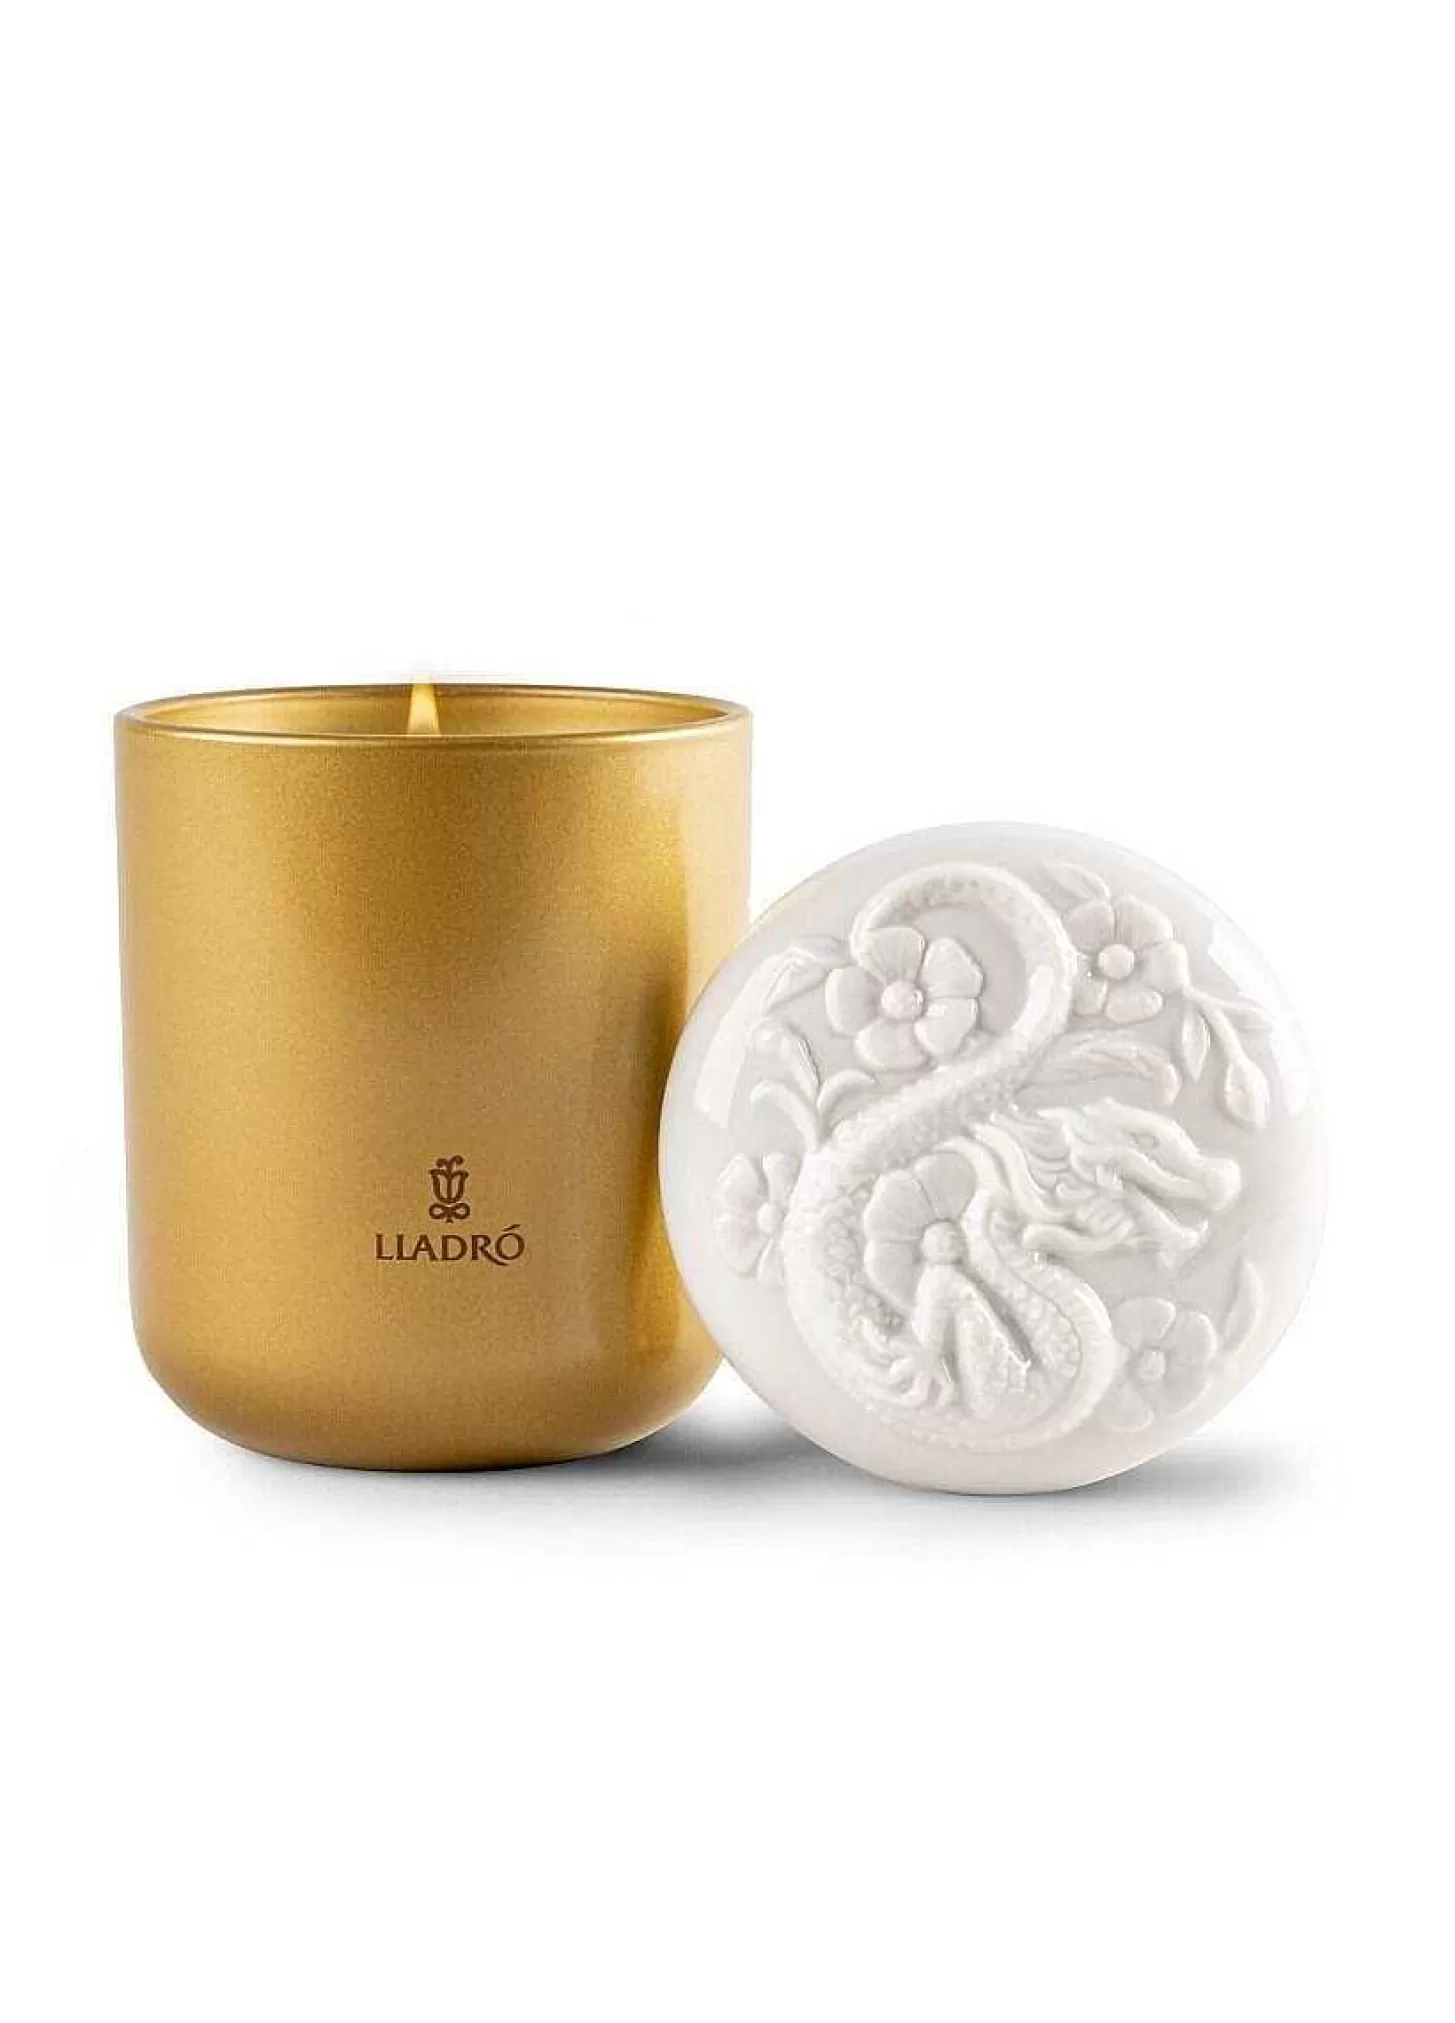 Lladró Dragon Candle - Redwood Fire^ Gifts